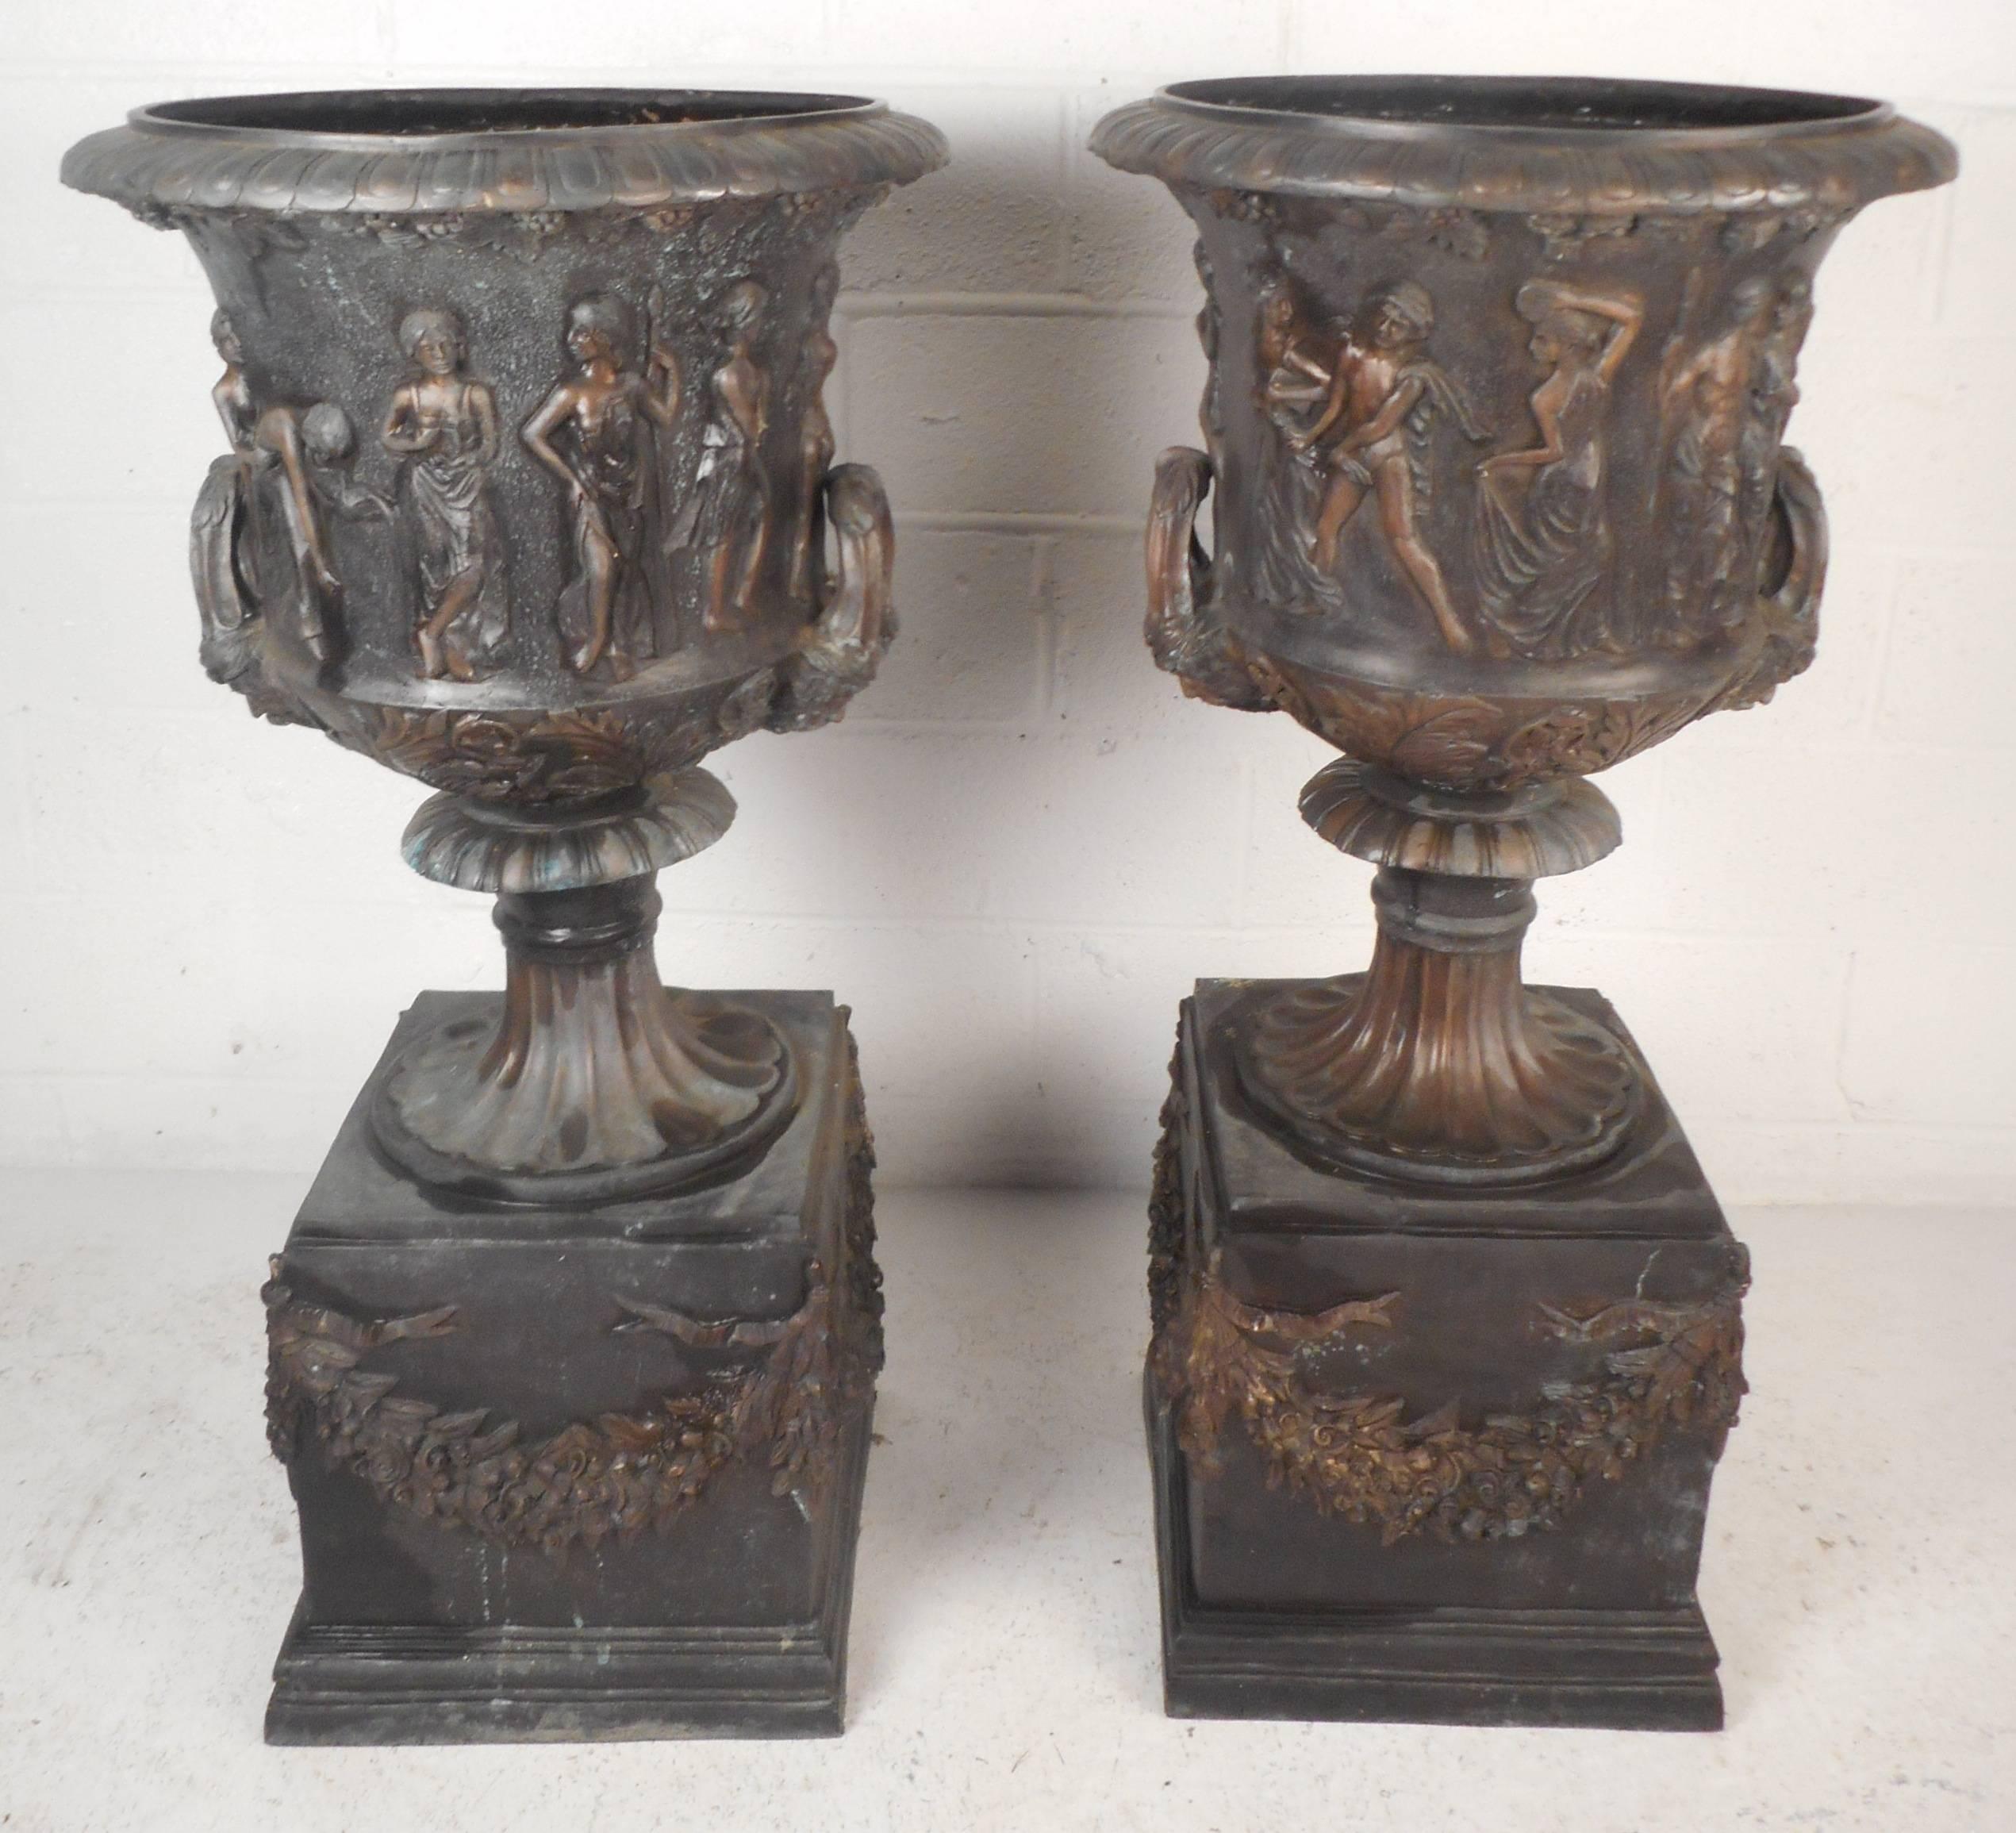 Stunning pair of Medici style bronze urns feature a wide classical figural Bacchnalian frieze over a wide petal form band. Intricate detail on beautifully patinated bronze. This impressive pair of pedestal urns look elegant with flowers or simply as